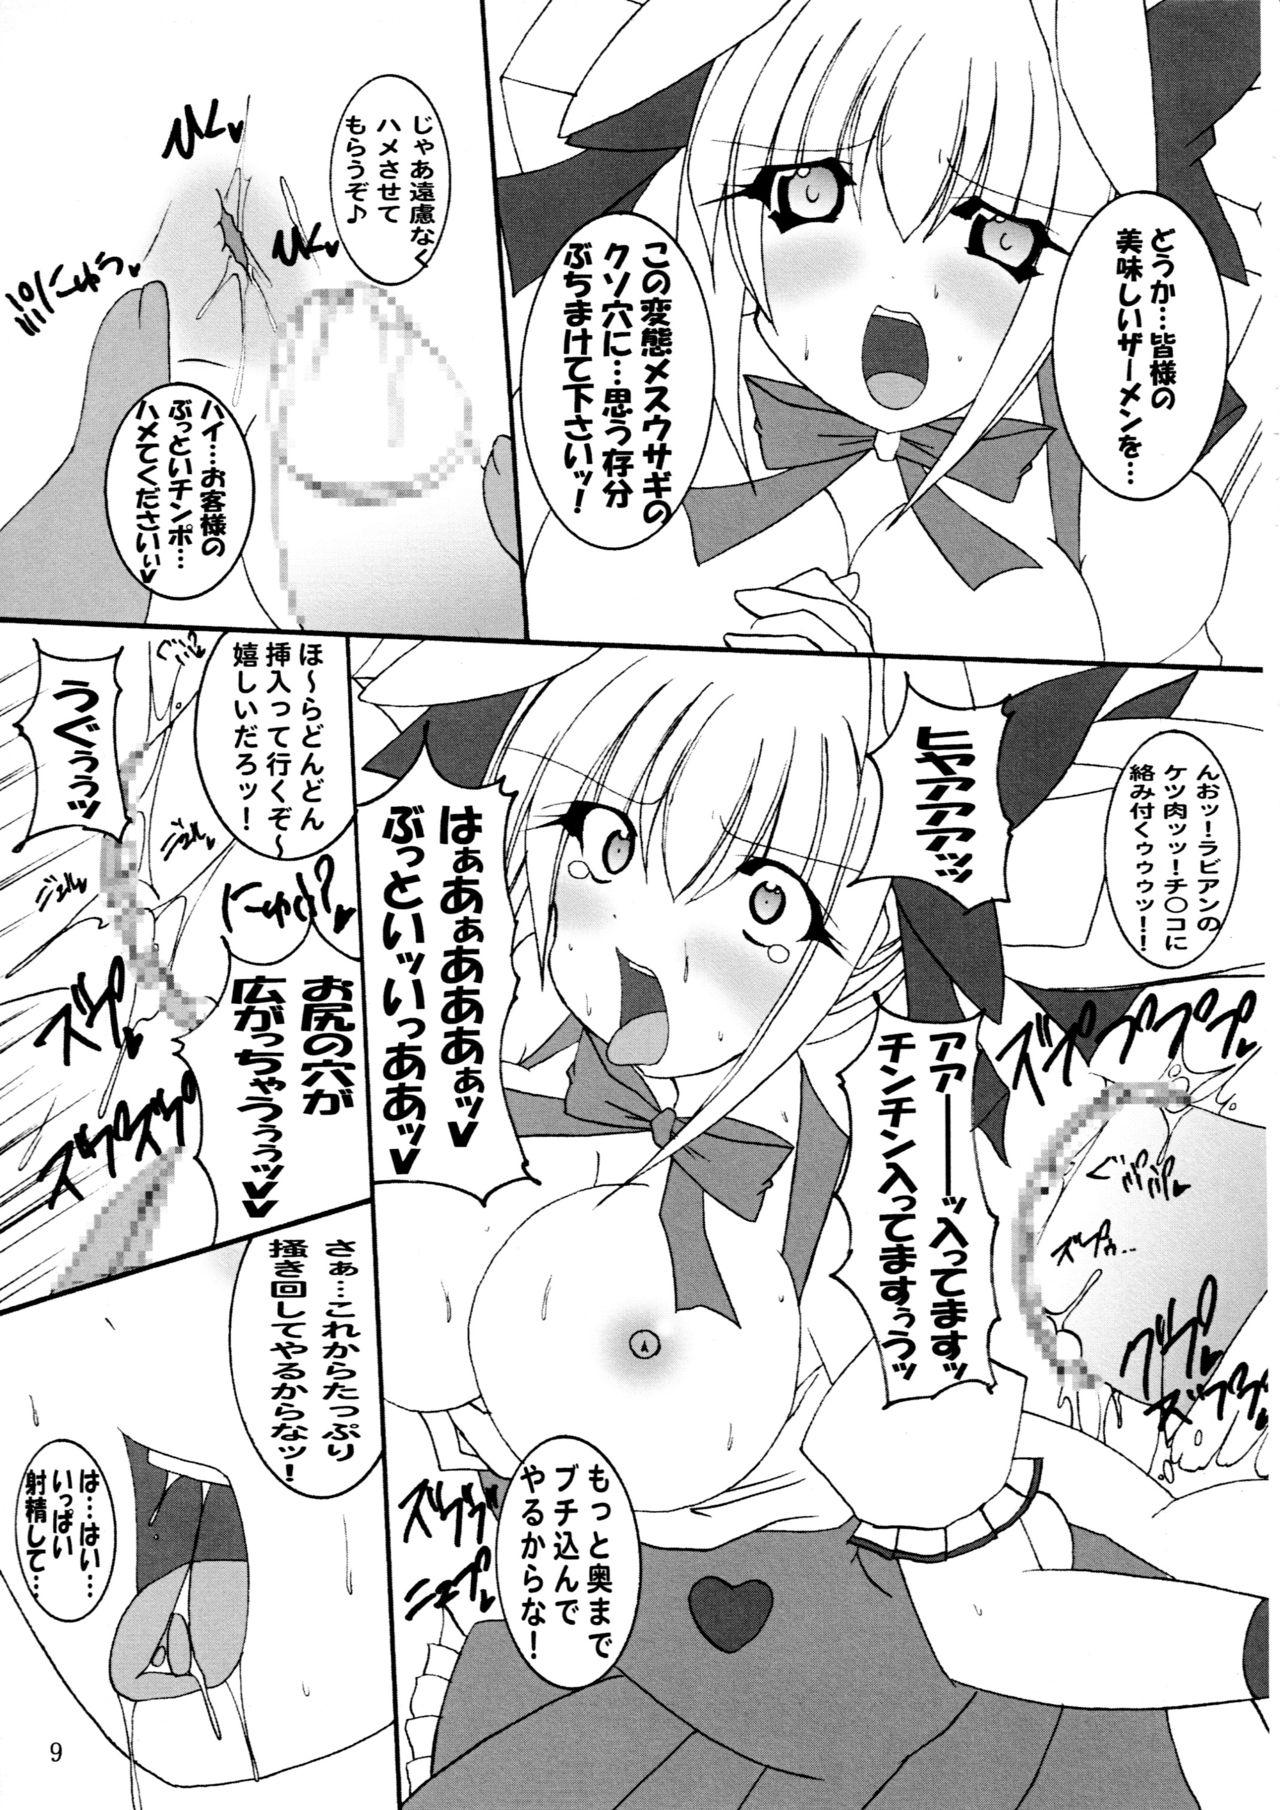 Anal Hitori Twintail & Abnormal Carnival - Di gi charat Hot Whores - Page 10